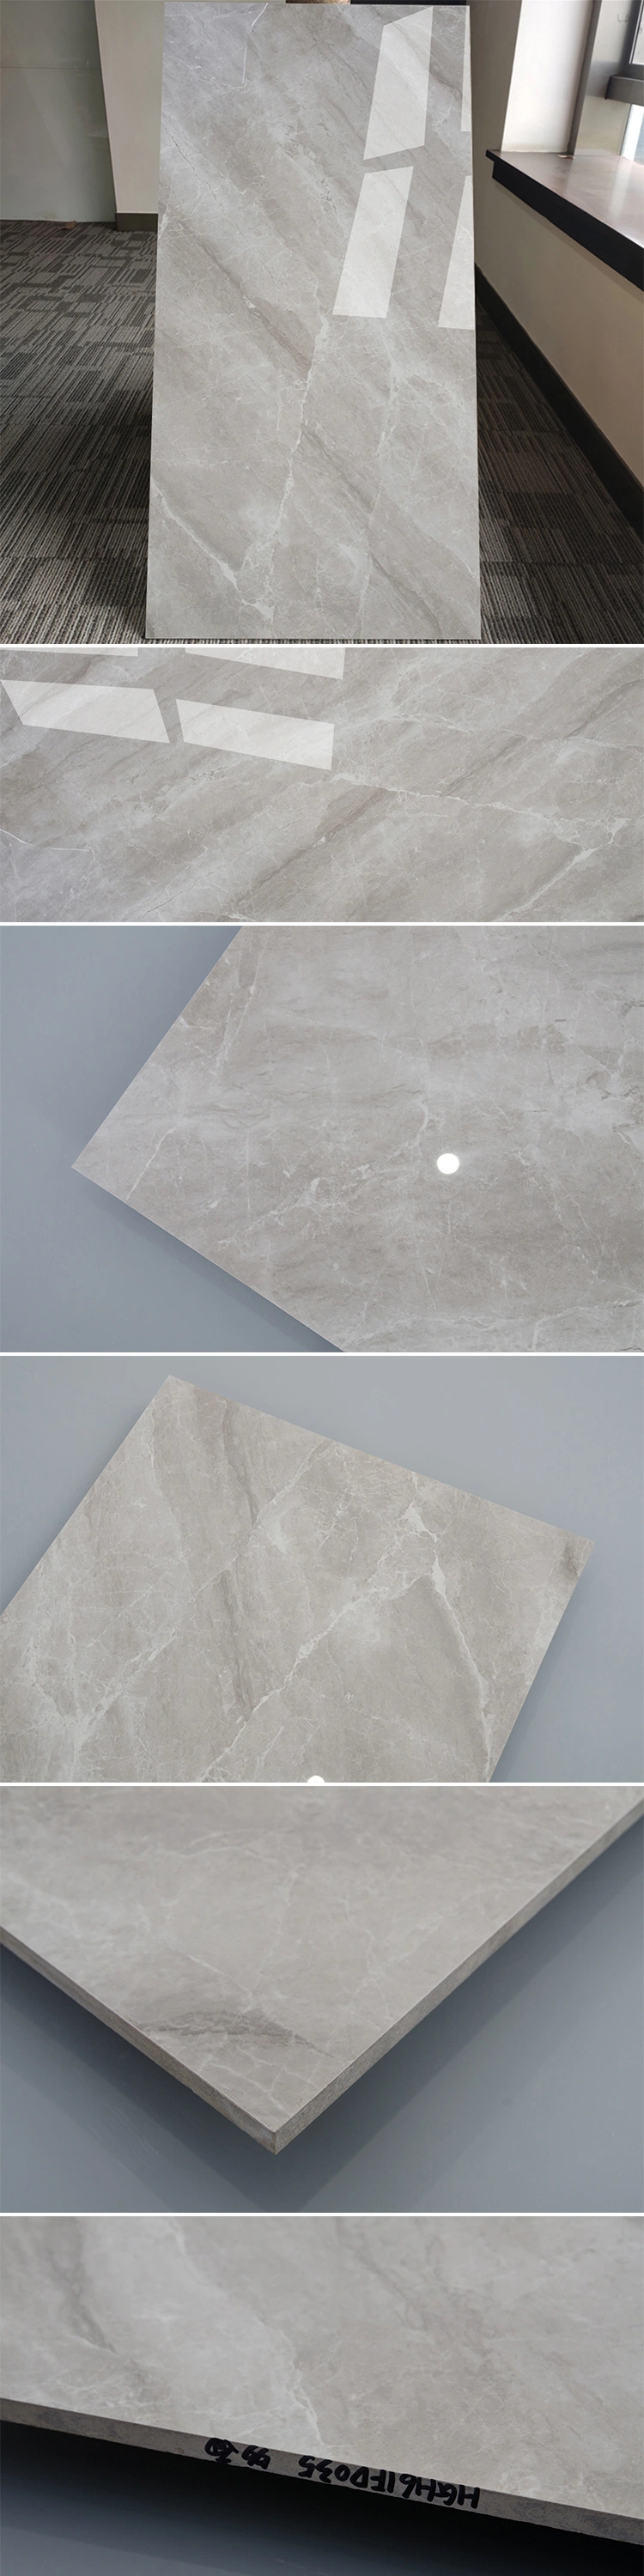 600X1200mm Gray Marble Texture Standard Ceramic Wall Tile Sizes